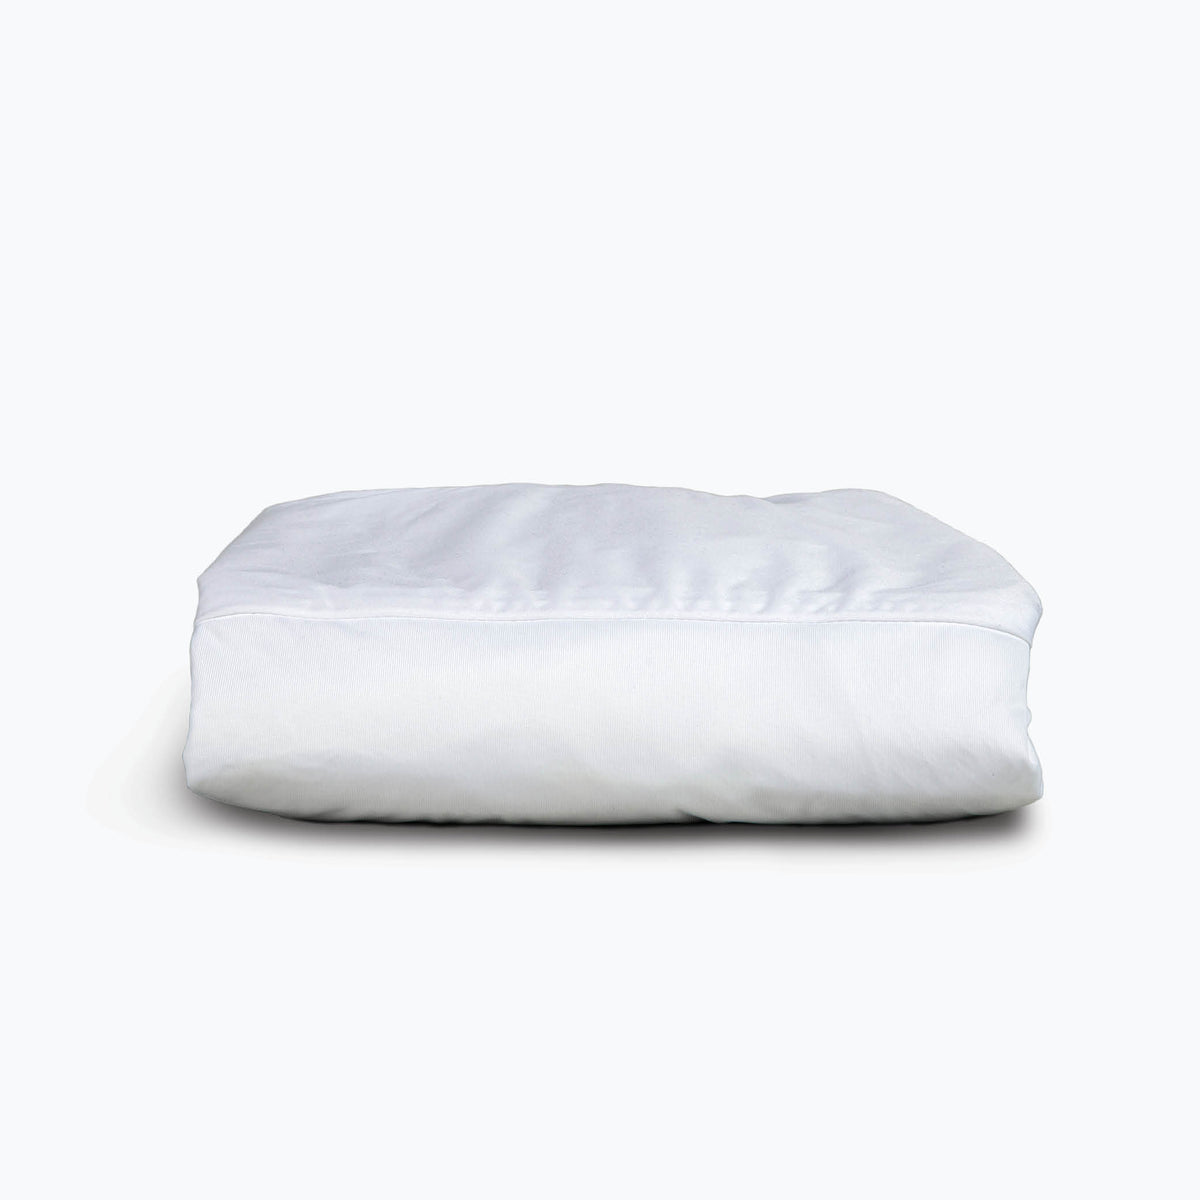 Image of a neatly folded white mattress protector on a white background